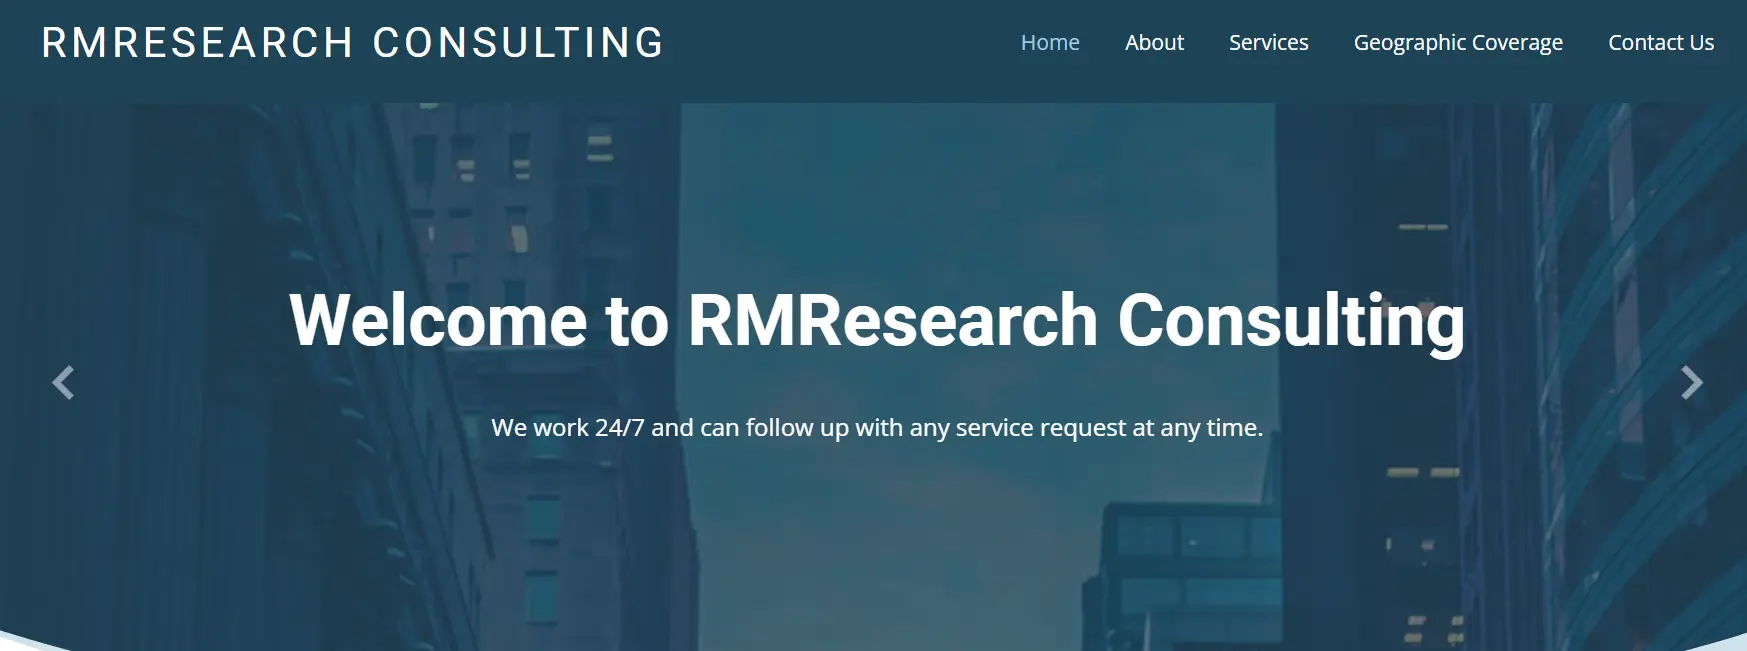 RM Research Consulting